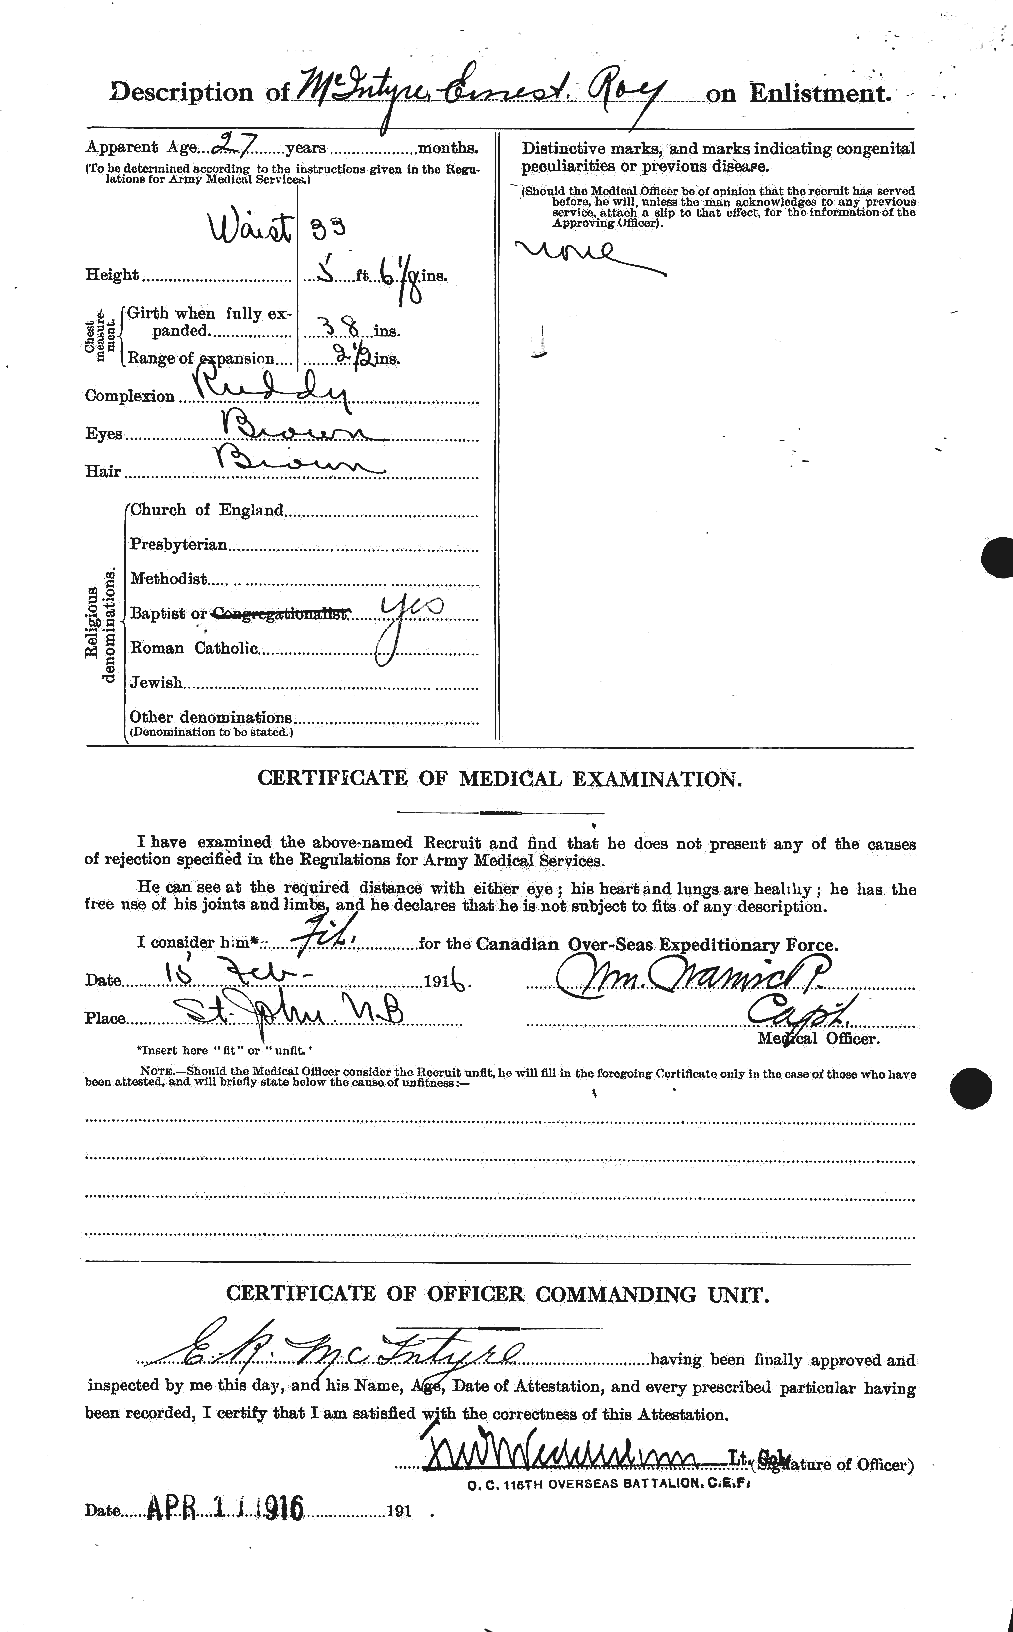 Personnel Records of the First World War - CEF 527365b